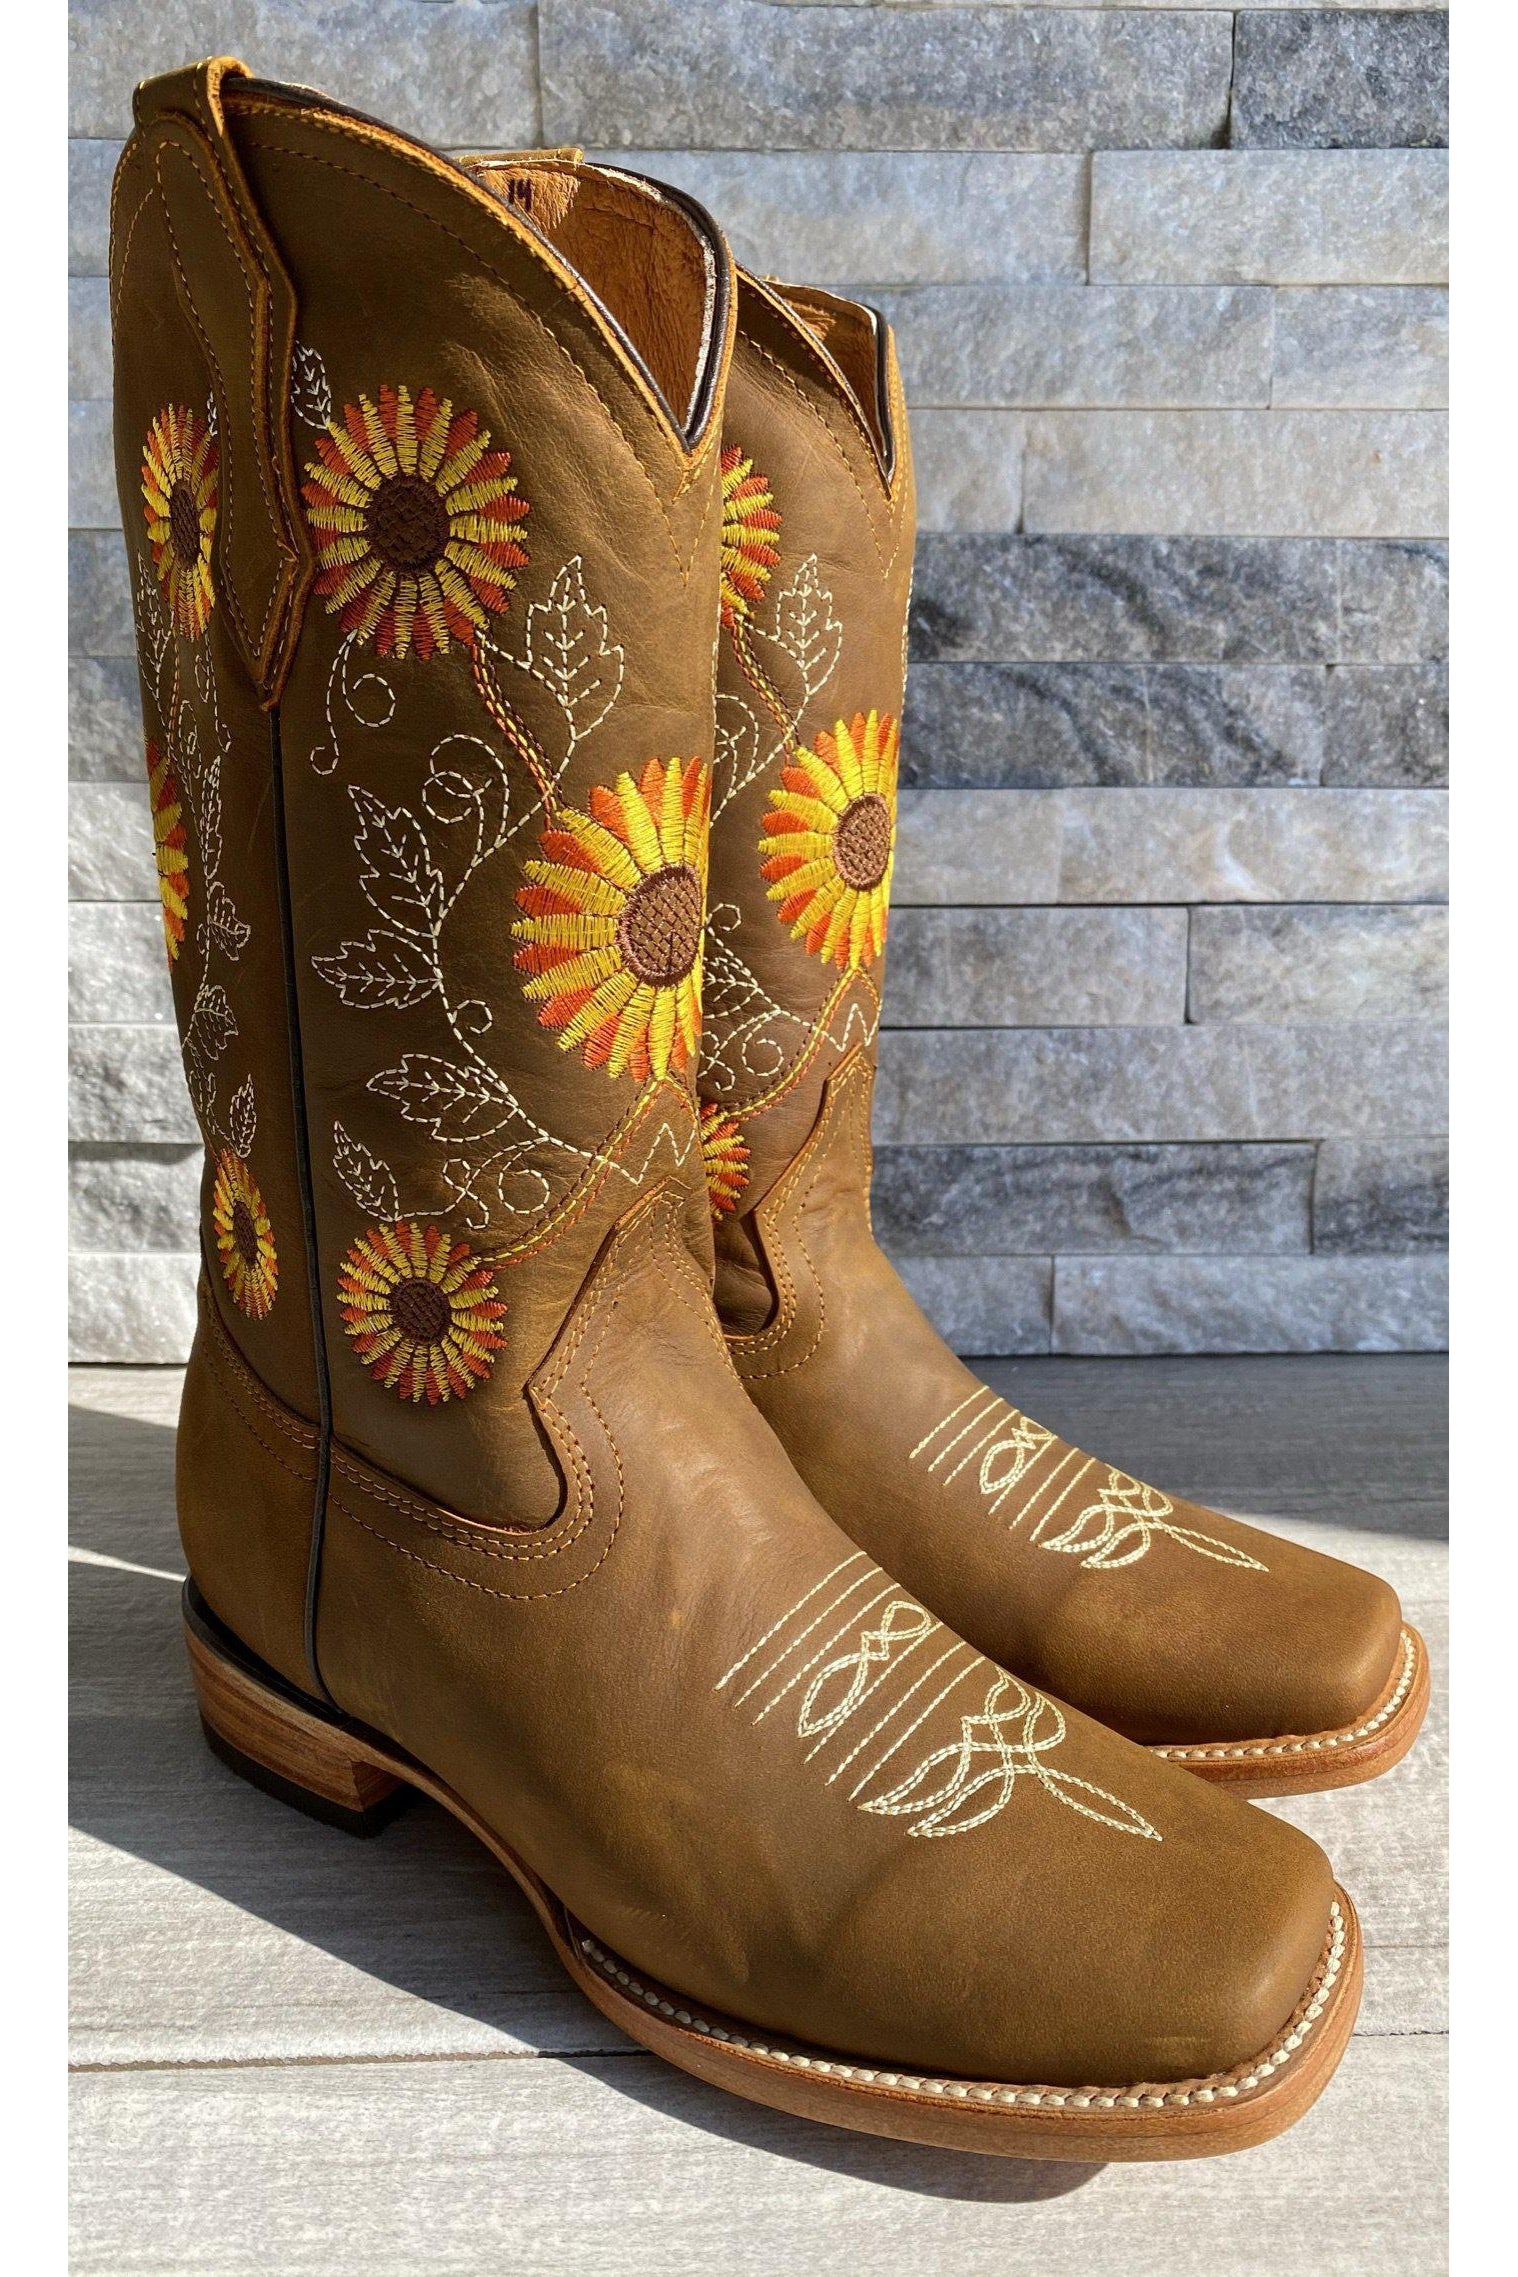 Cactus Country Women’s Golden Sunflower Boots